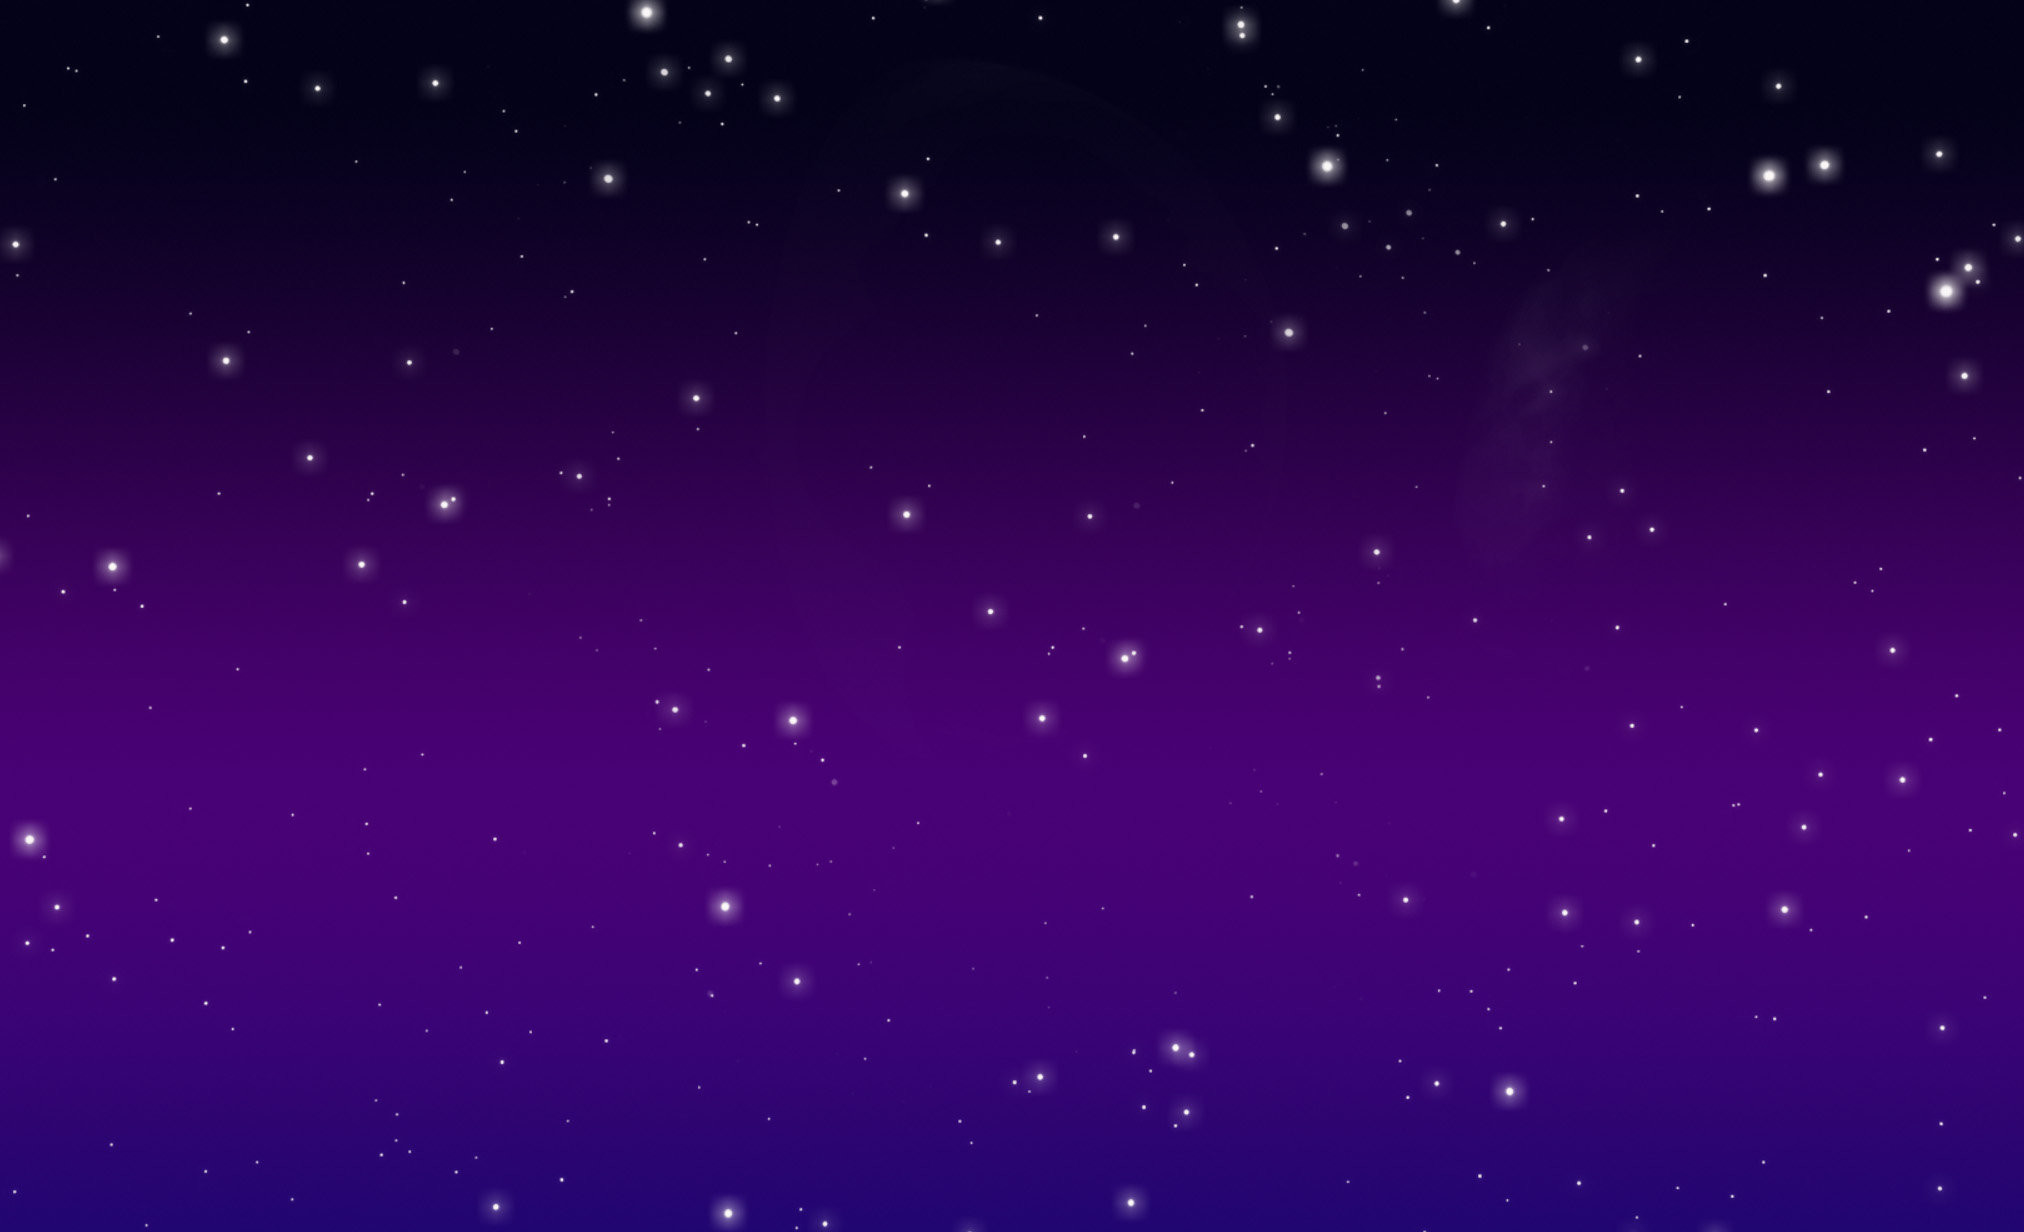 2024x1232 FREE:Purple Space Background by Magical-Mama.